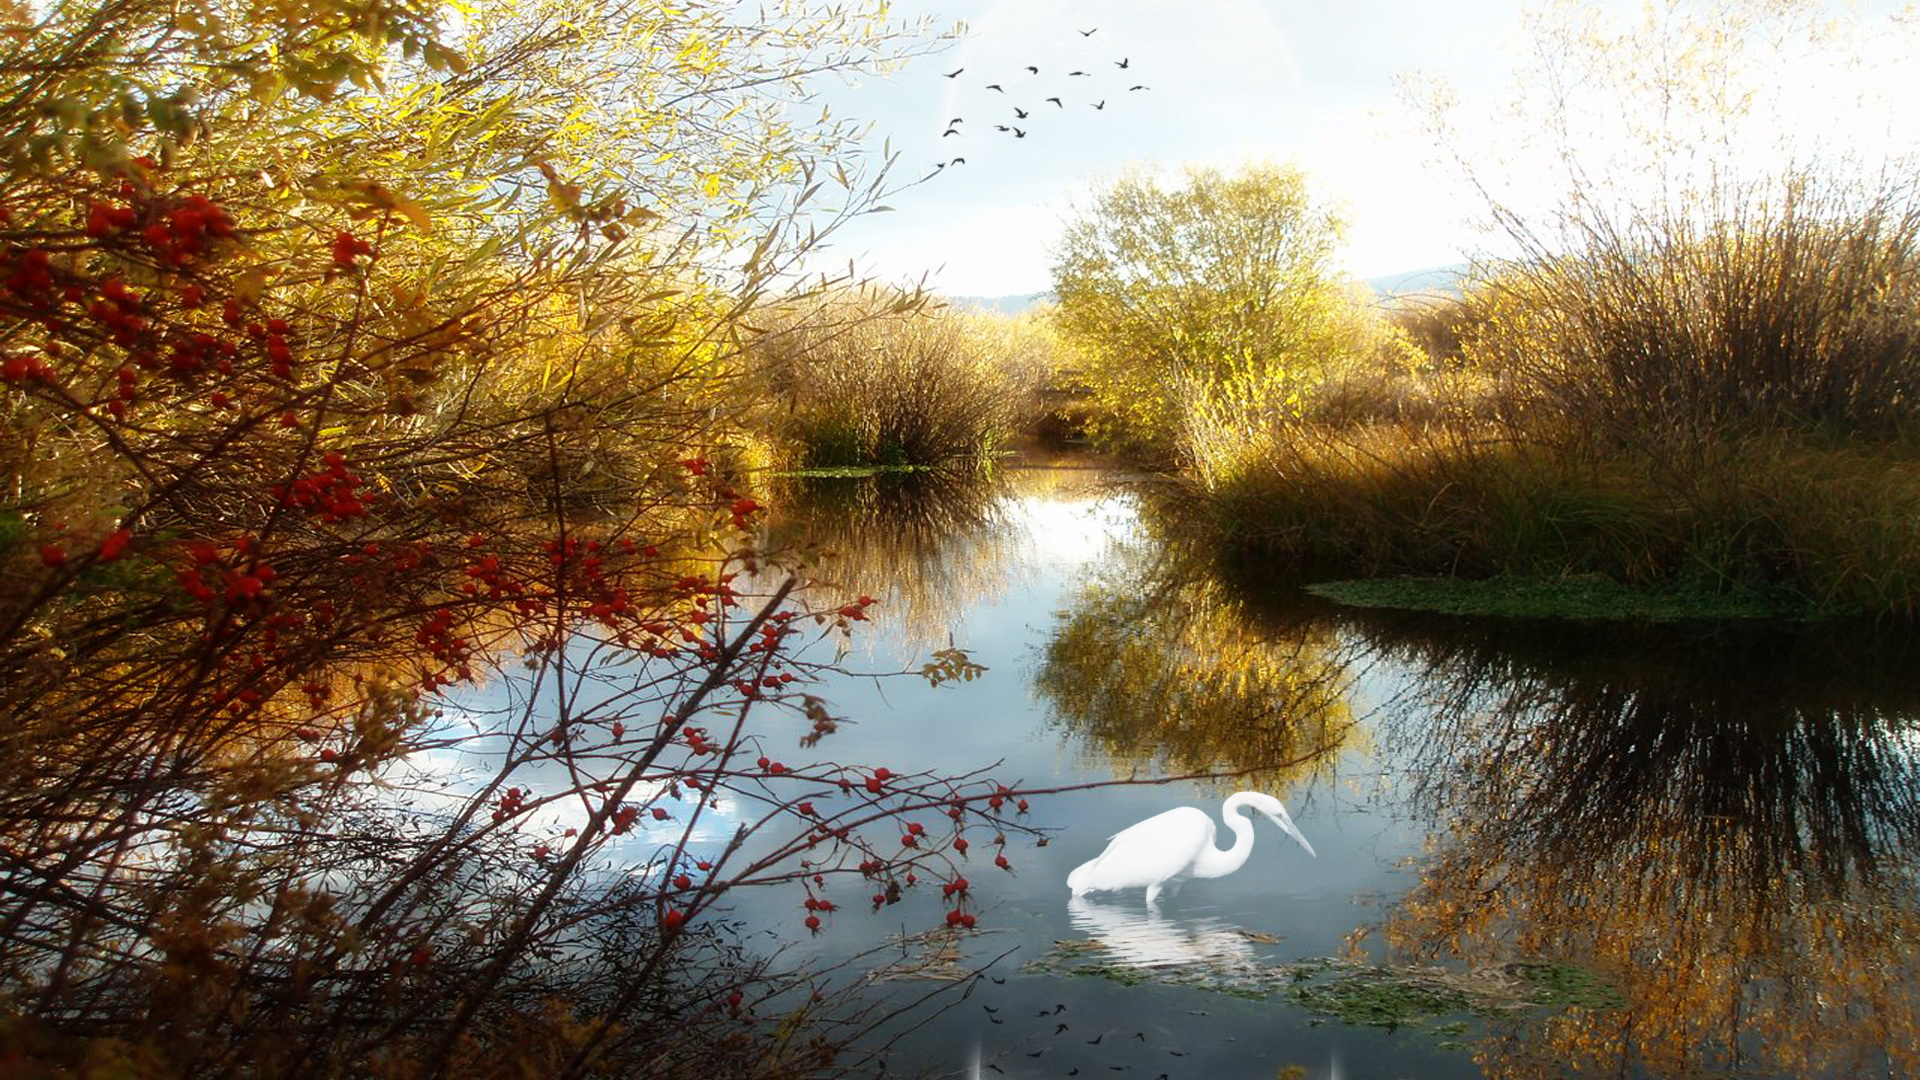 Pics of Natural Scene - The Clear and Blue River, a White Swan Standing in It, Plants Turning Yellow 1920X1080 free wallpaper download